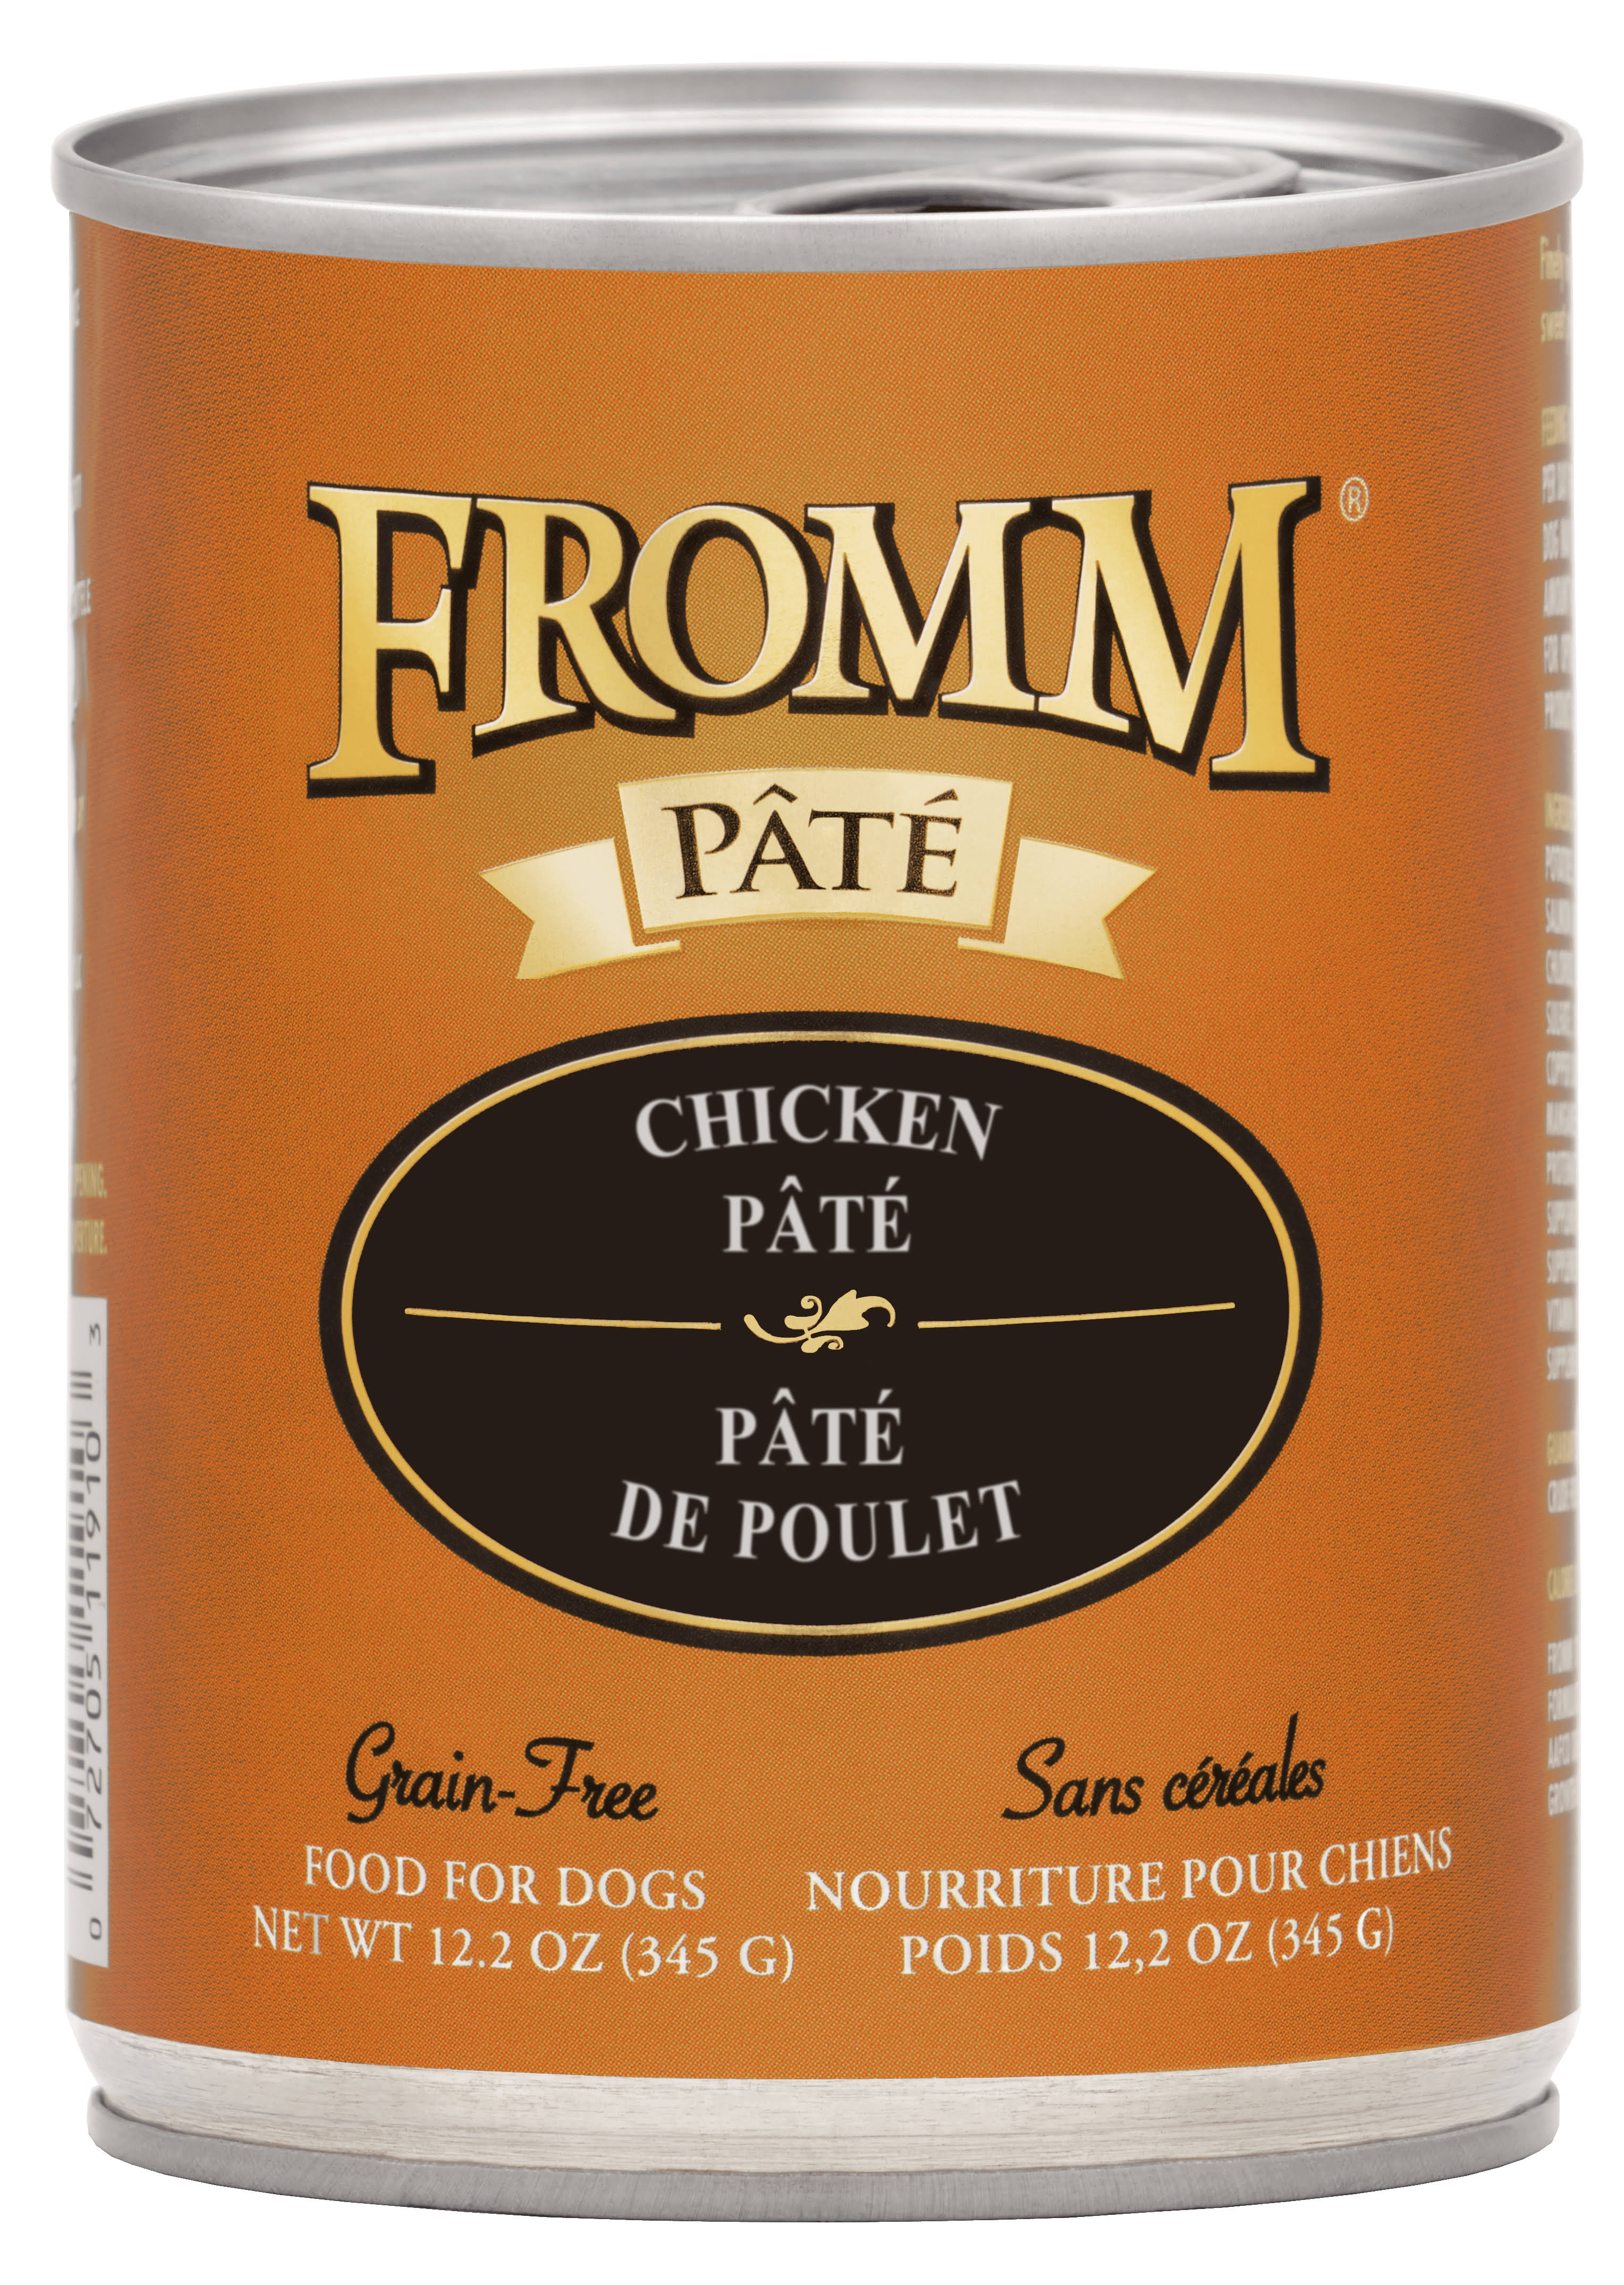 Fromm Gold Chicken Pate Grain-Free Canned Dog Food